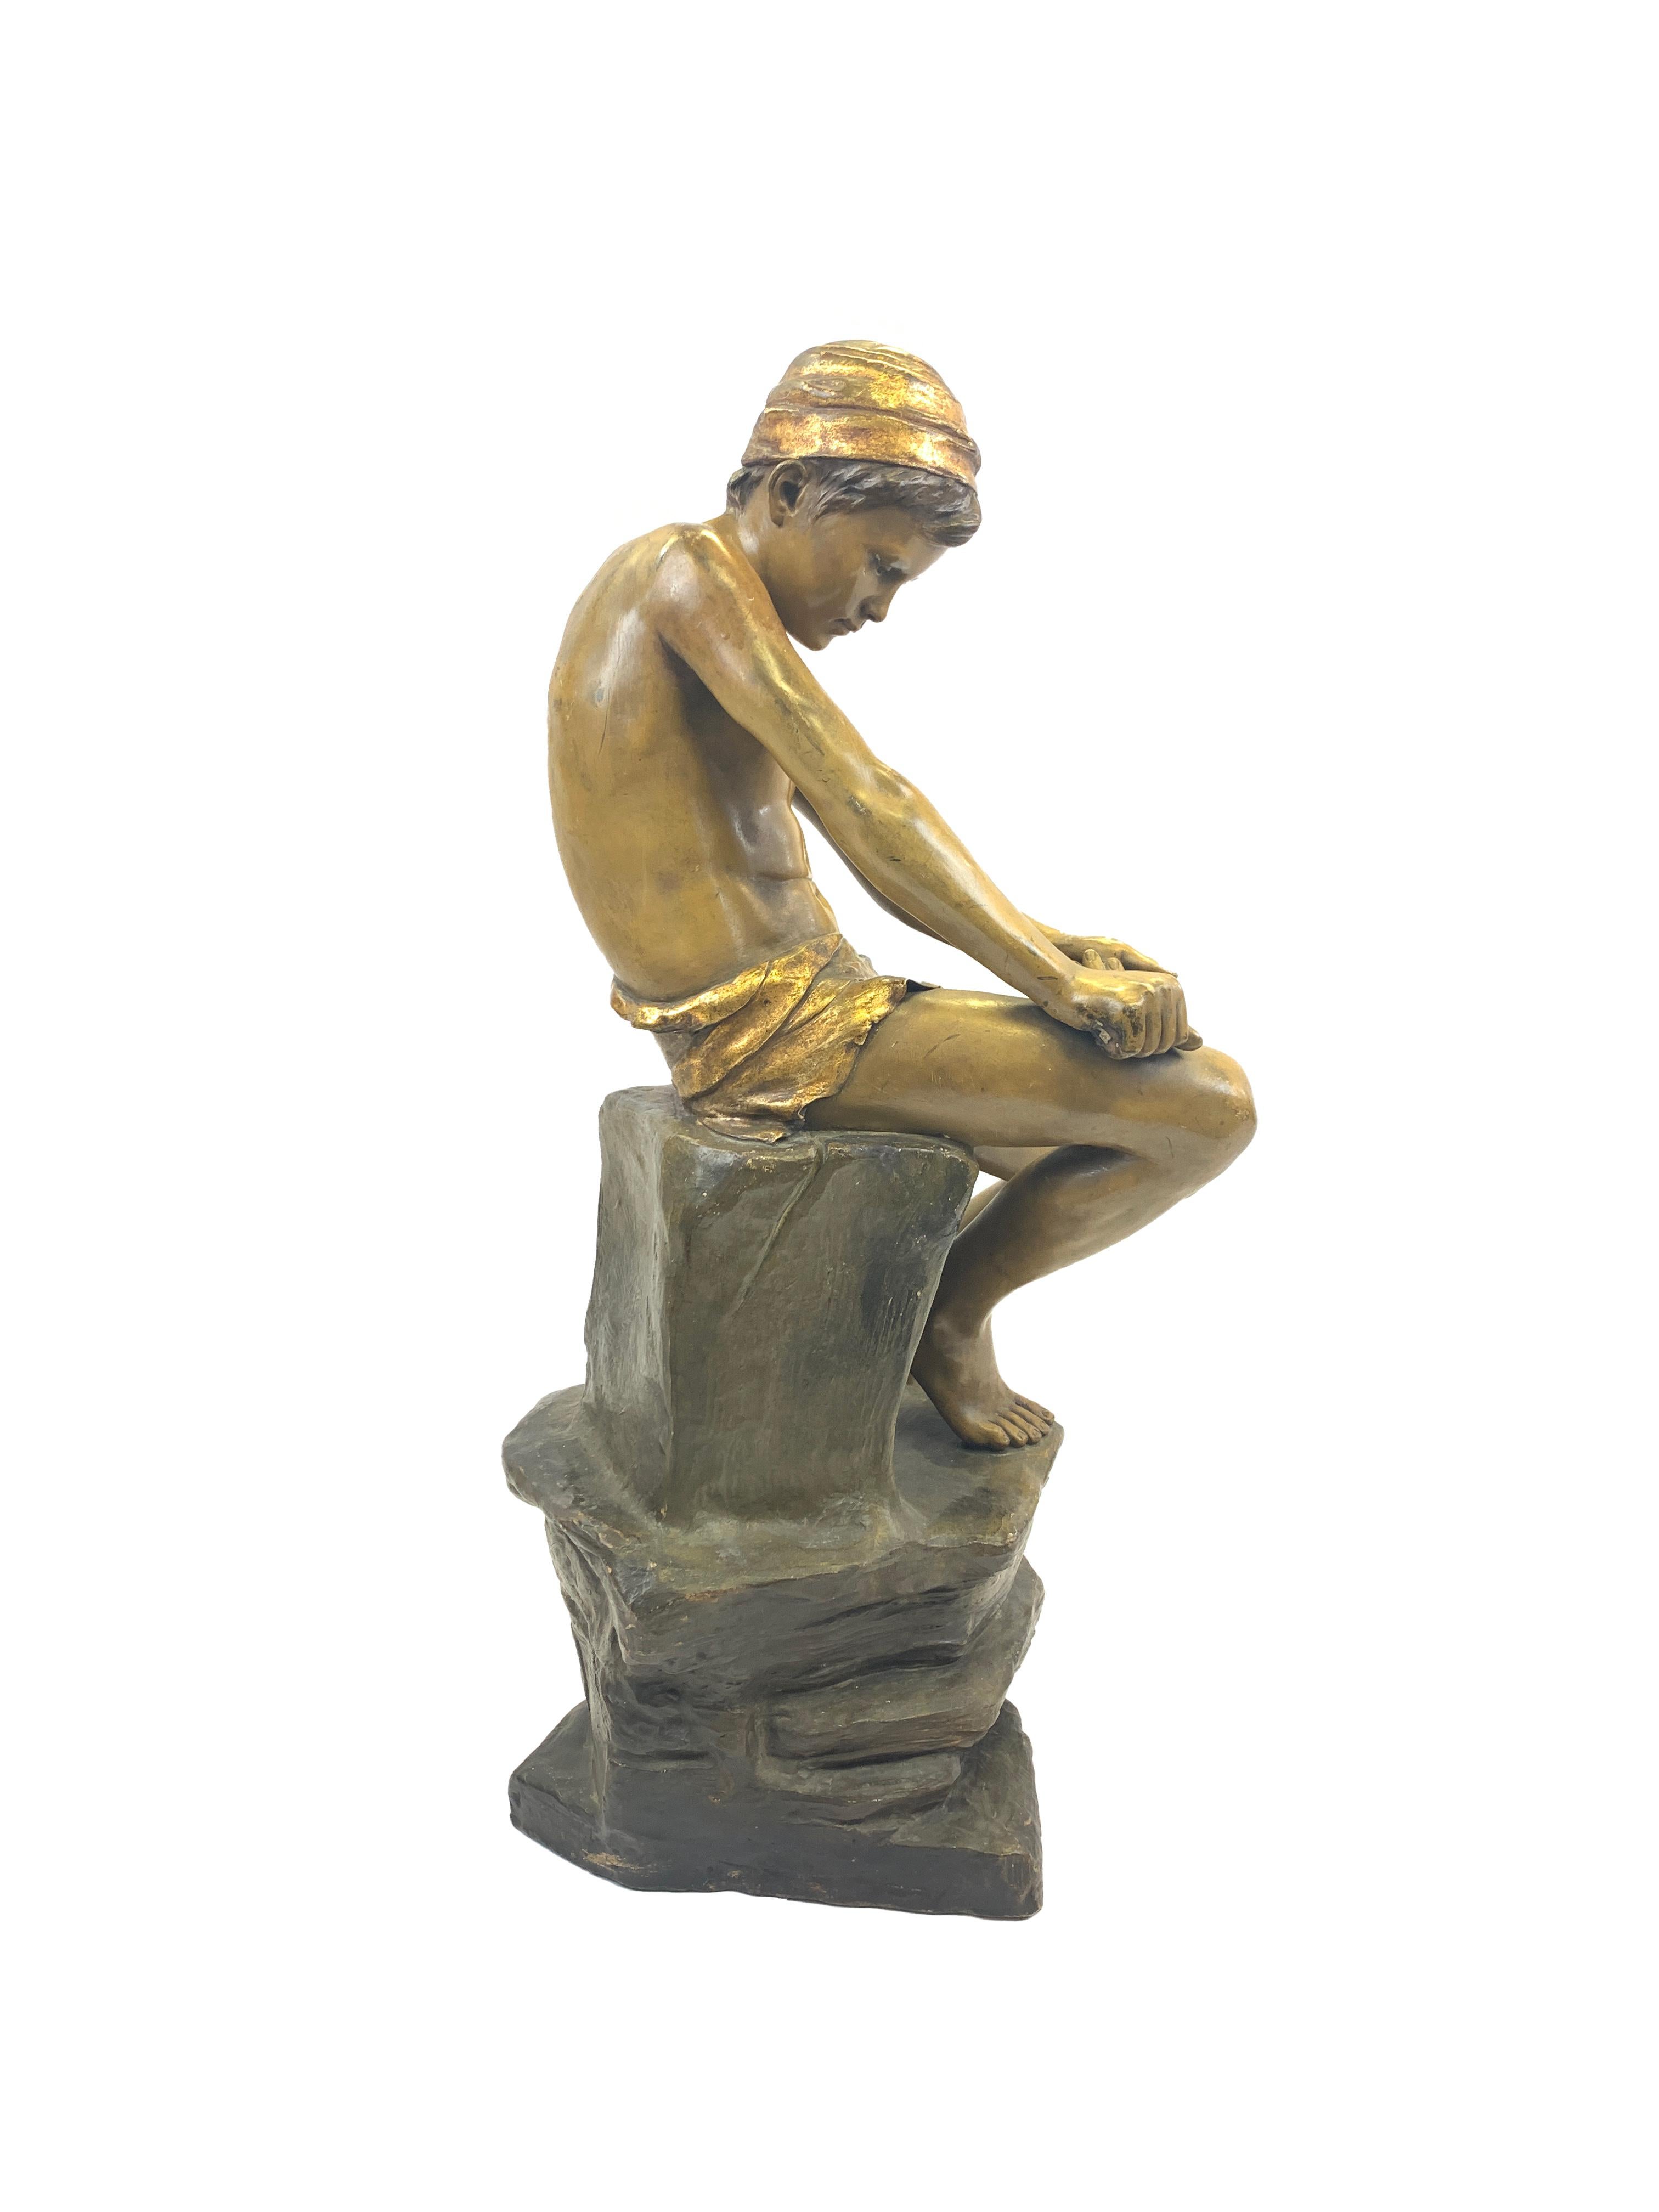 The action and intense concentration of the young boy almost make us forget he is made of terracotta! This piece bears be Friedrich Goldscheider mark, as well as a signature. (1845-1897).
 